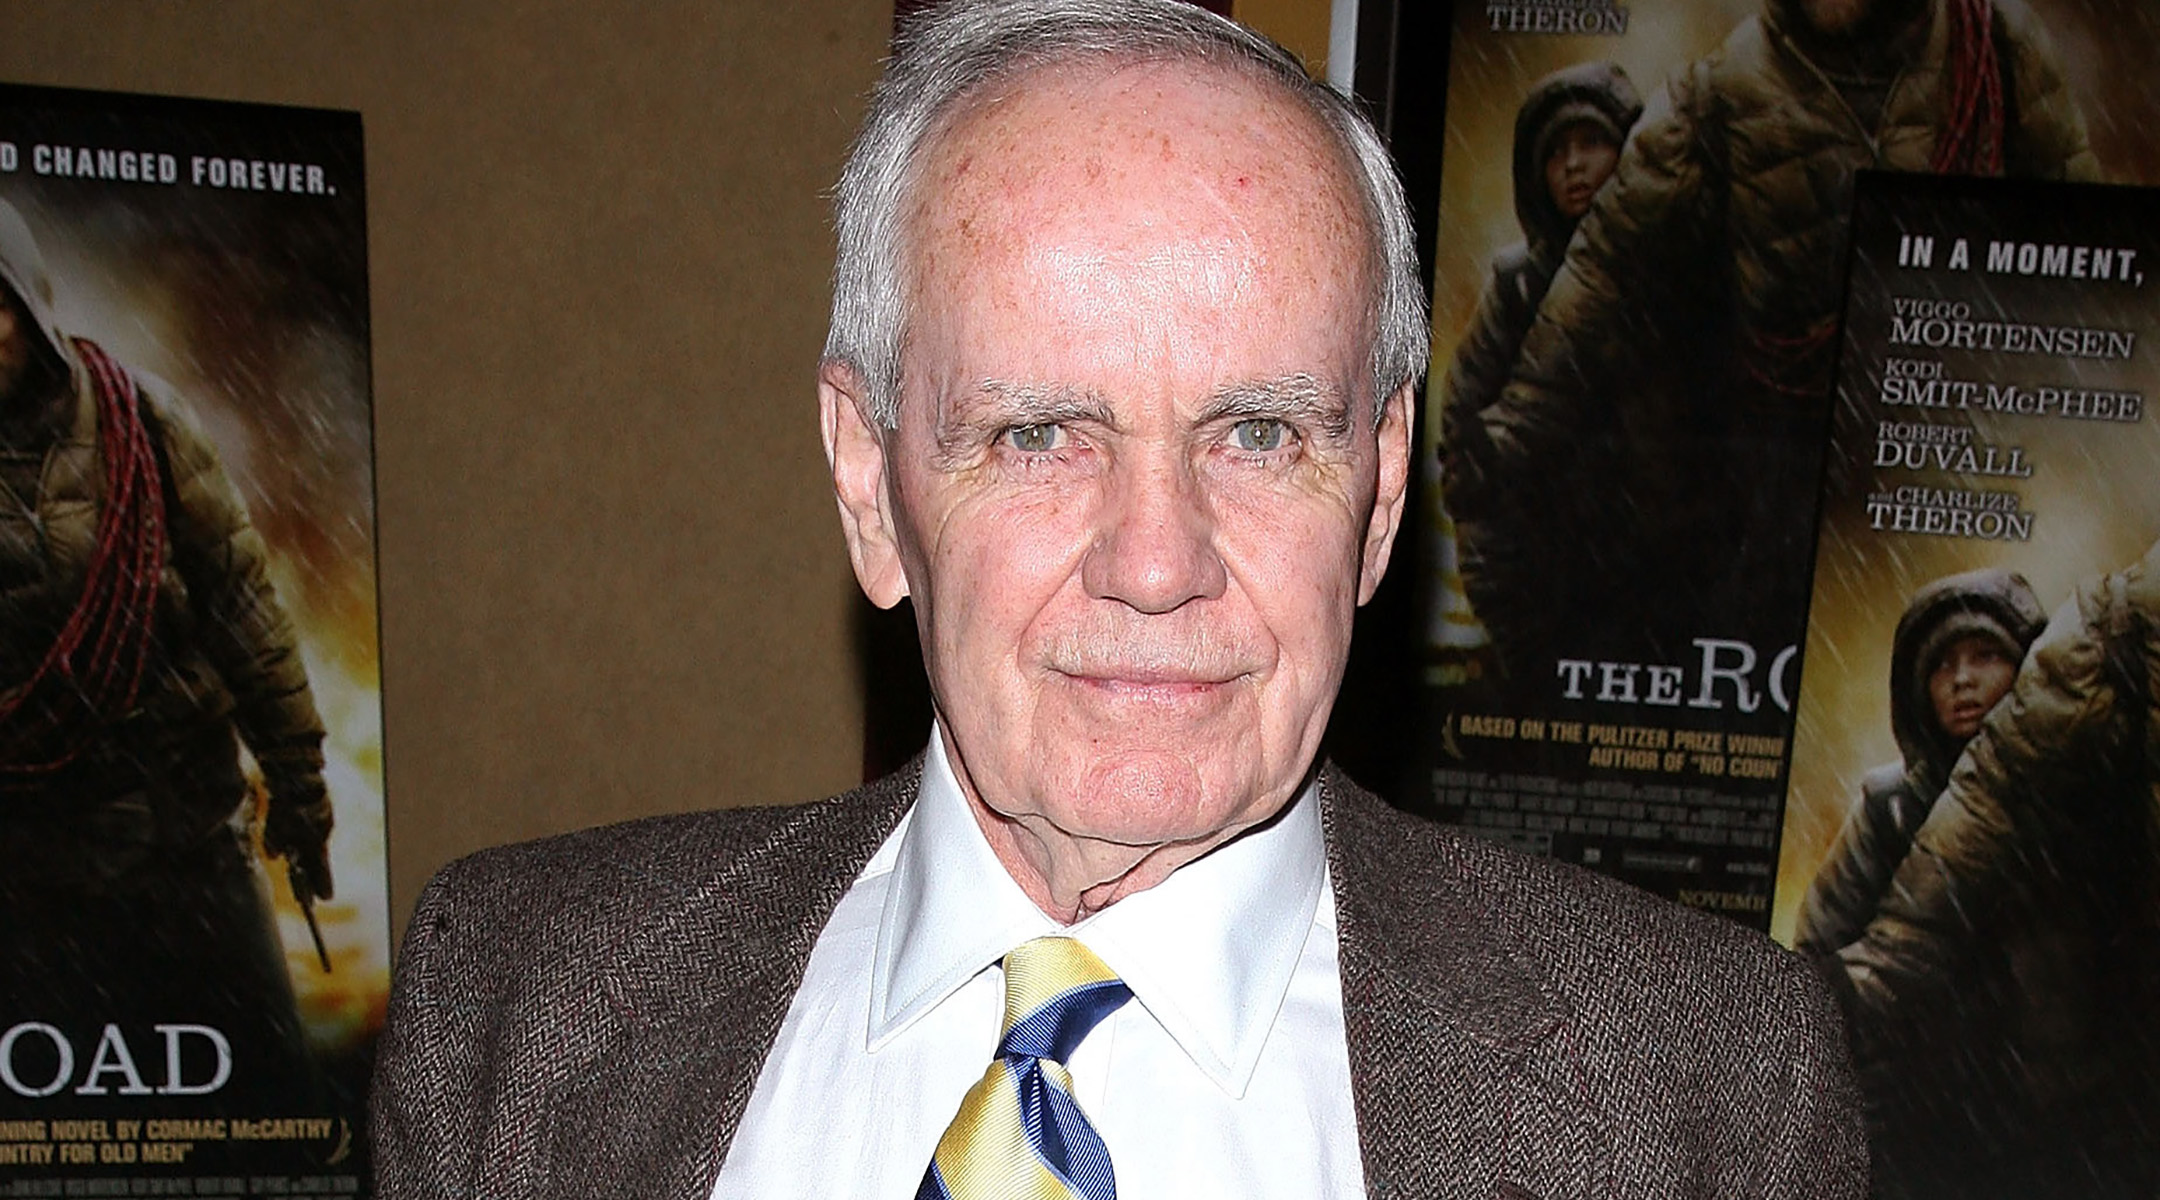 Writer Cormac McCarthy attends the premiere of “The Road” at Clearview Chelsea Cinemas in New York City, Nov. 16, 2009. (Jim Spellman/WireImage)